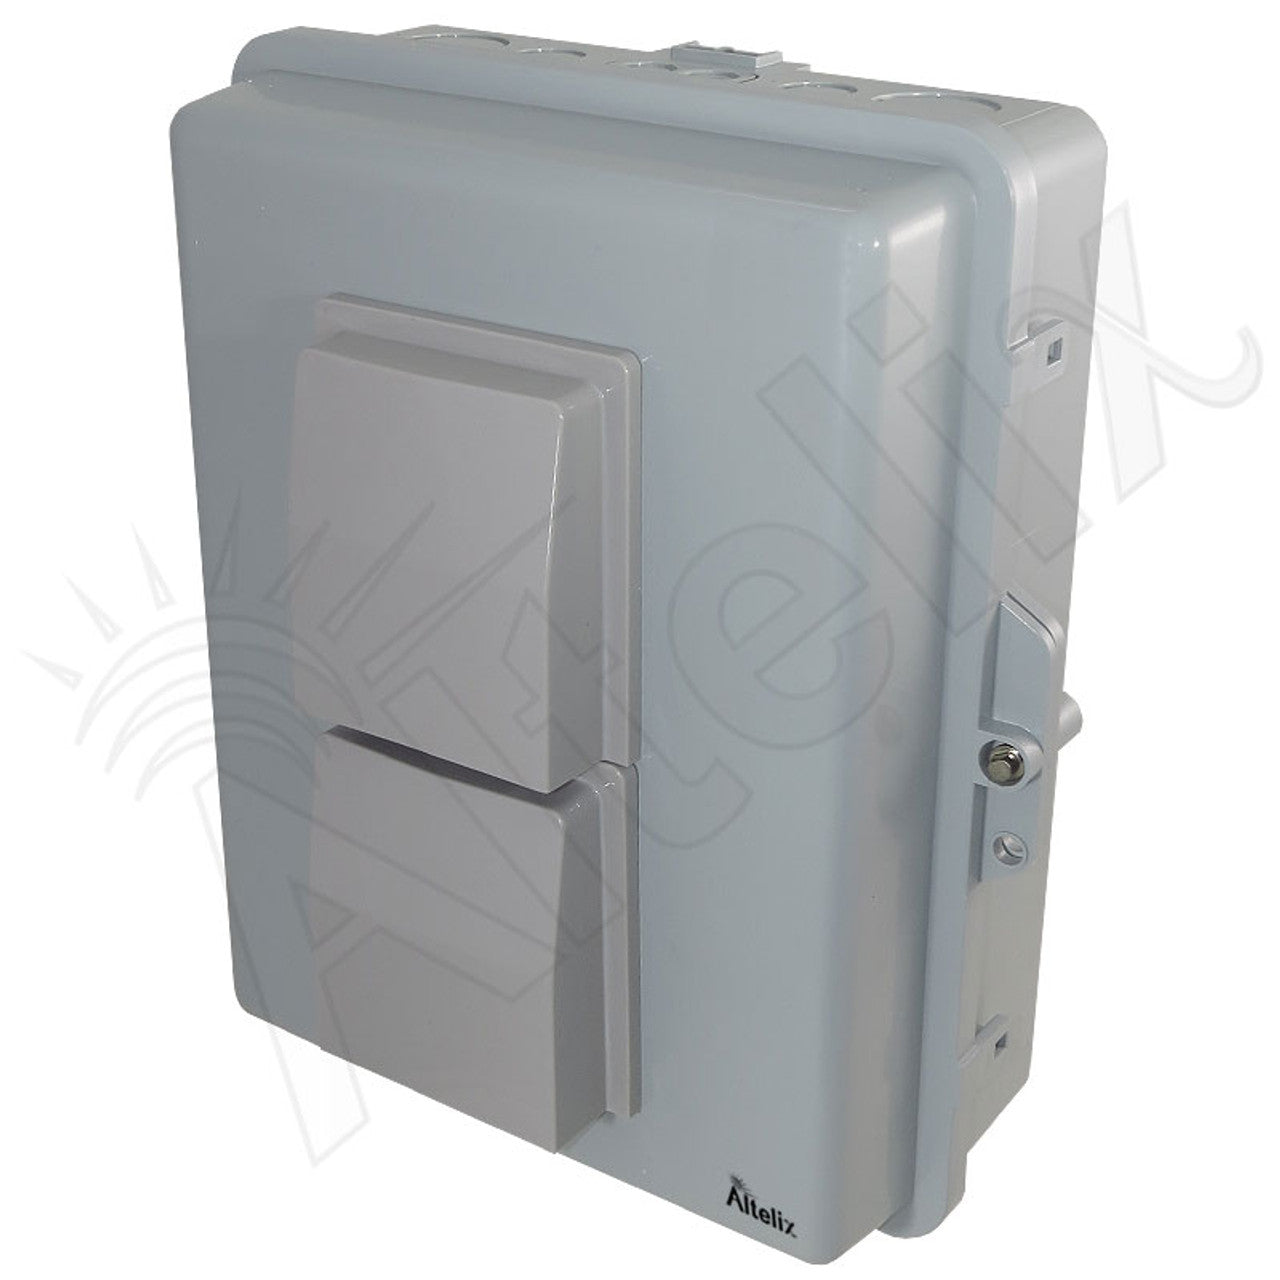 Altelix 14x11x5 Polycarbonate + ABS Vented Weatherproof NEMA Enclosure with Aluminum Mounting Plate, 120 VAC Outlets & Power Cord